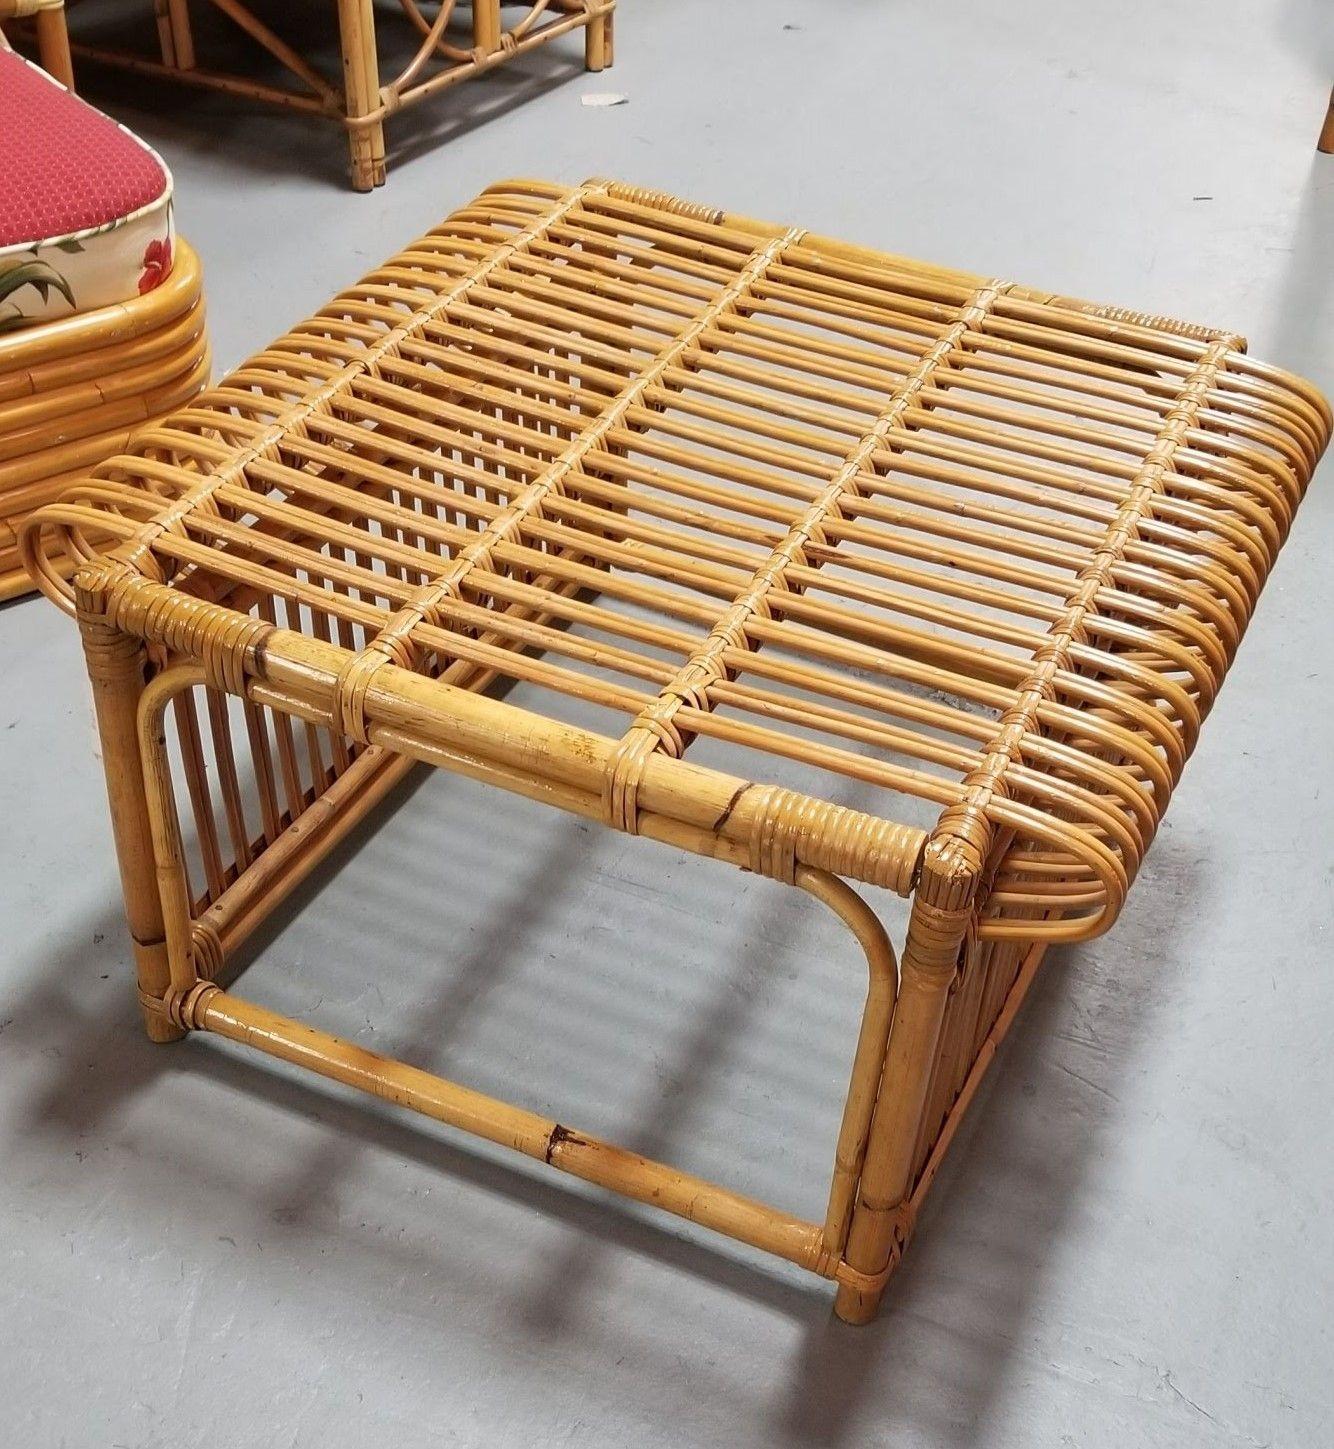 Restored Italian Pencil Reed Rattan Ottoman Footstool in the style of Albini In Excellent Condition For Sale In Van Nuys, CA